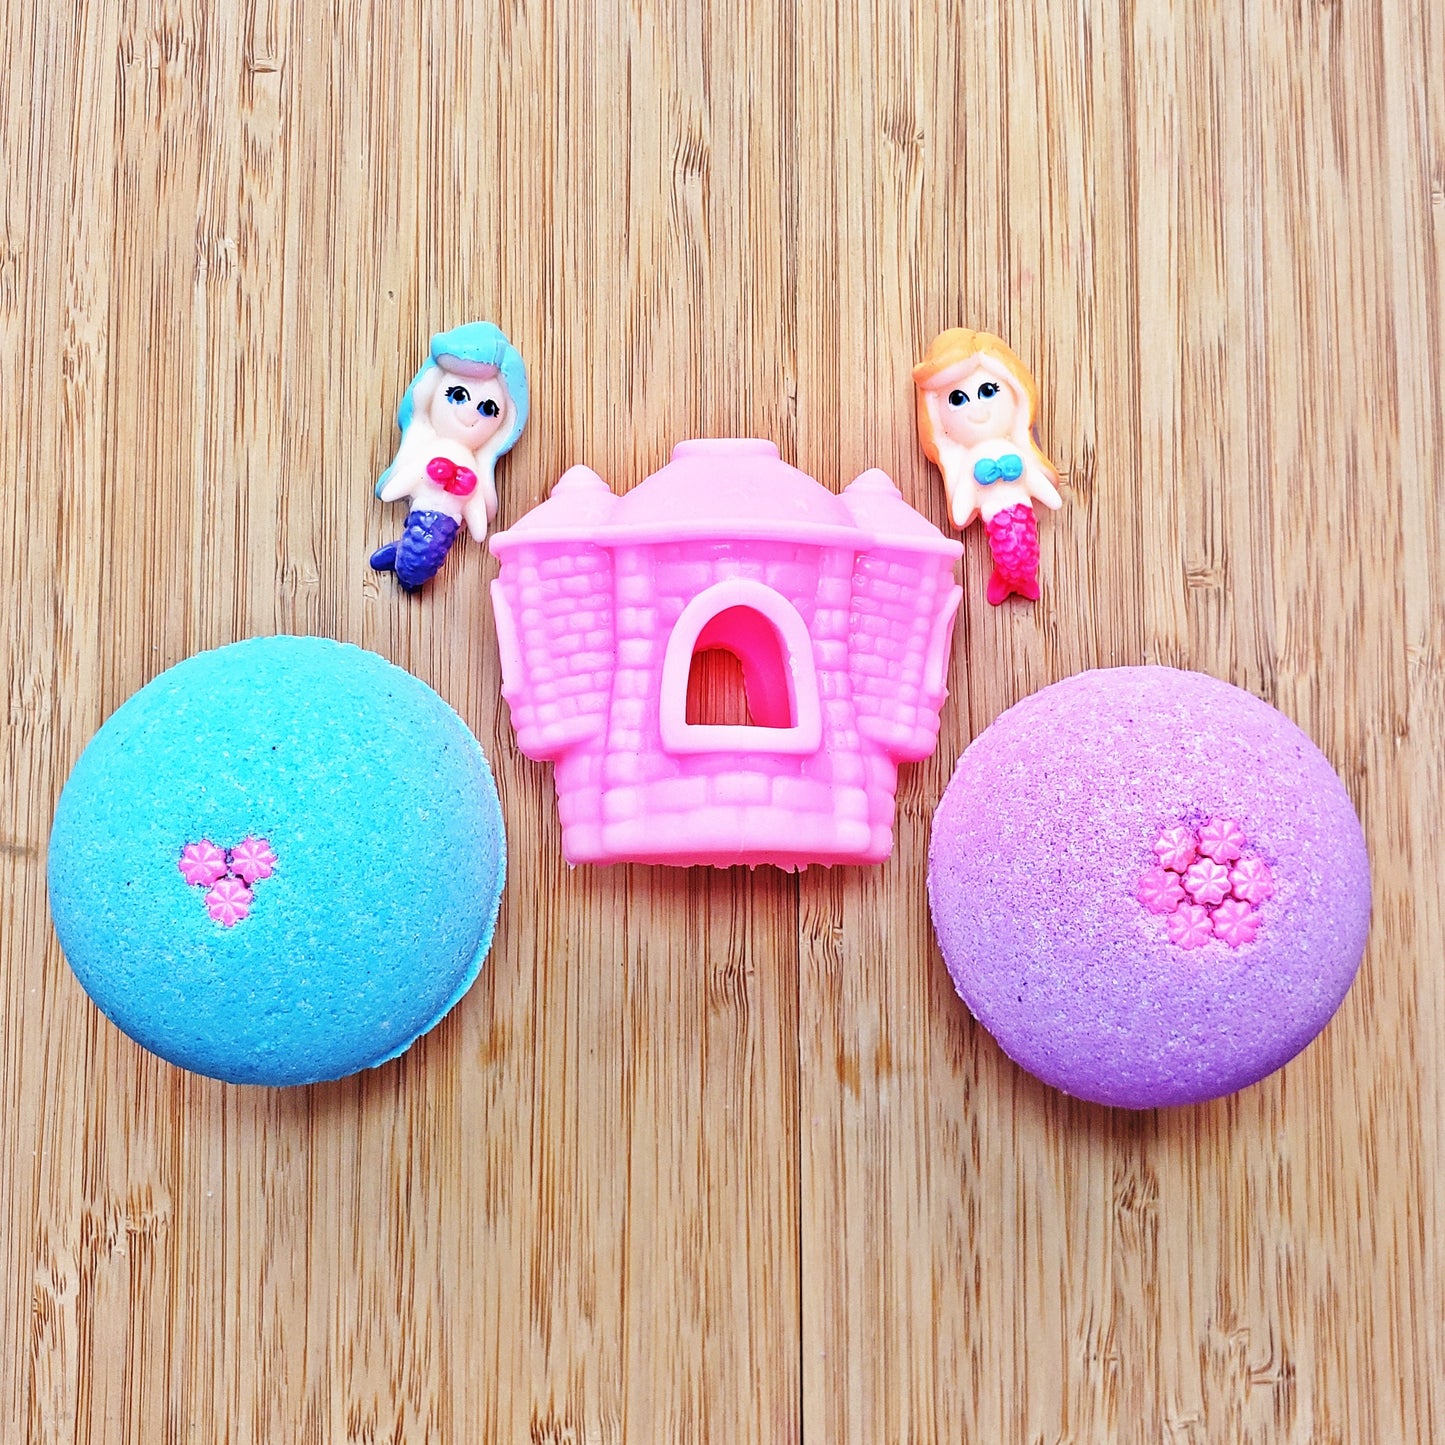 NEW! Mermaid Toy Set | 2 Bombs With Mermaid Inside + 1 Rubber Castle Toy | Children Kids